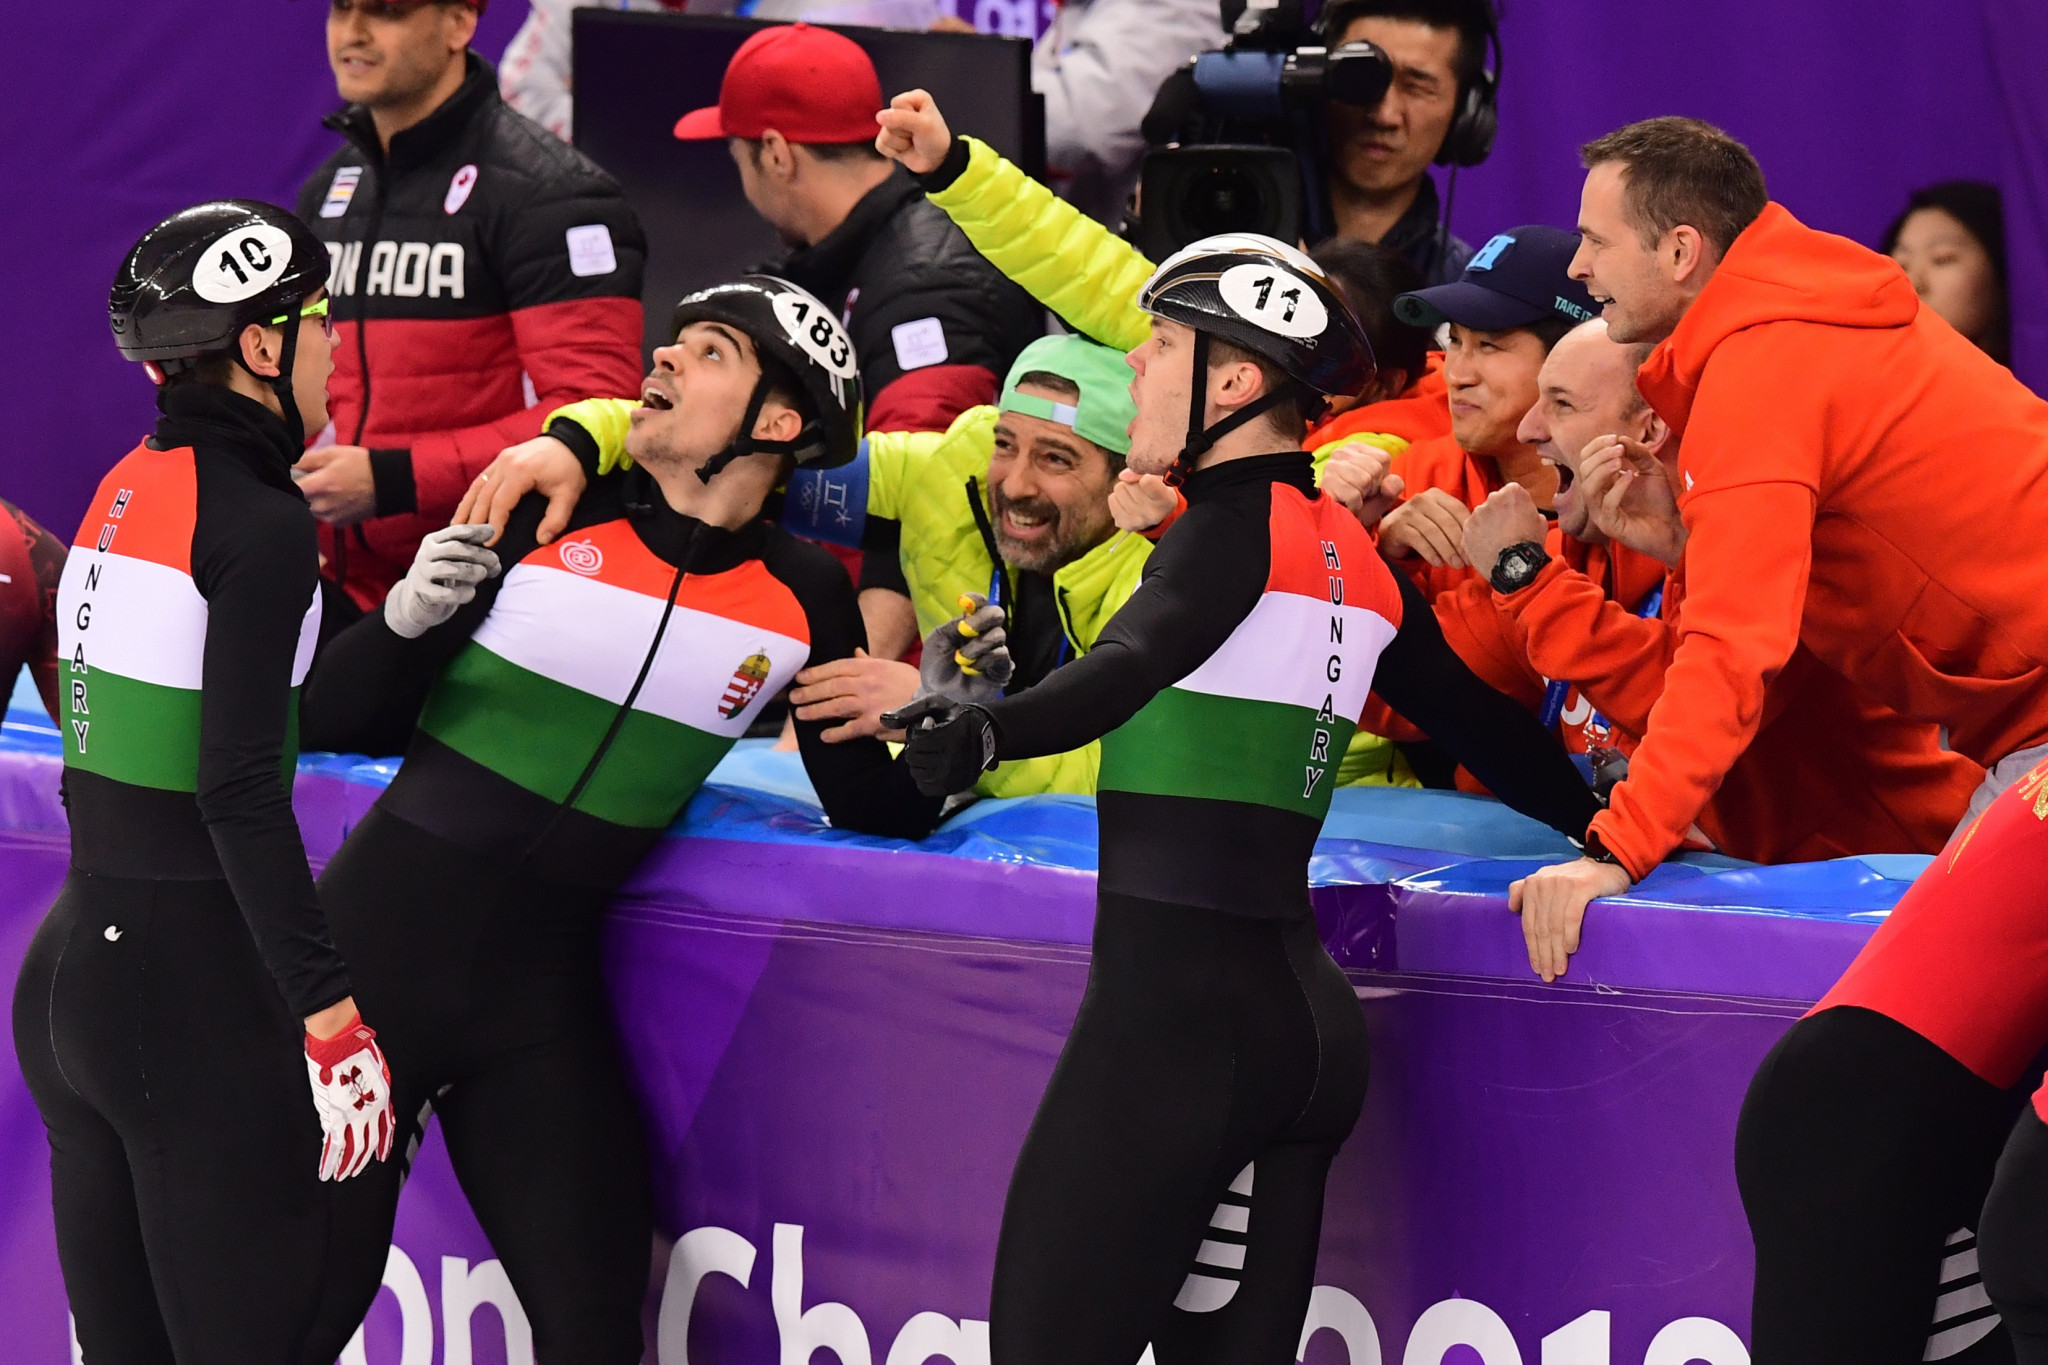 Hungary broke the Olympic record as they came out on top in the men's 5,000m relay ©Getty Images